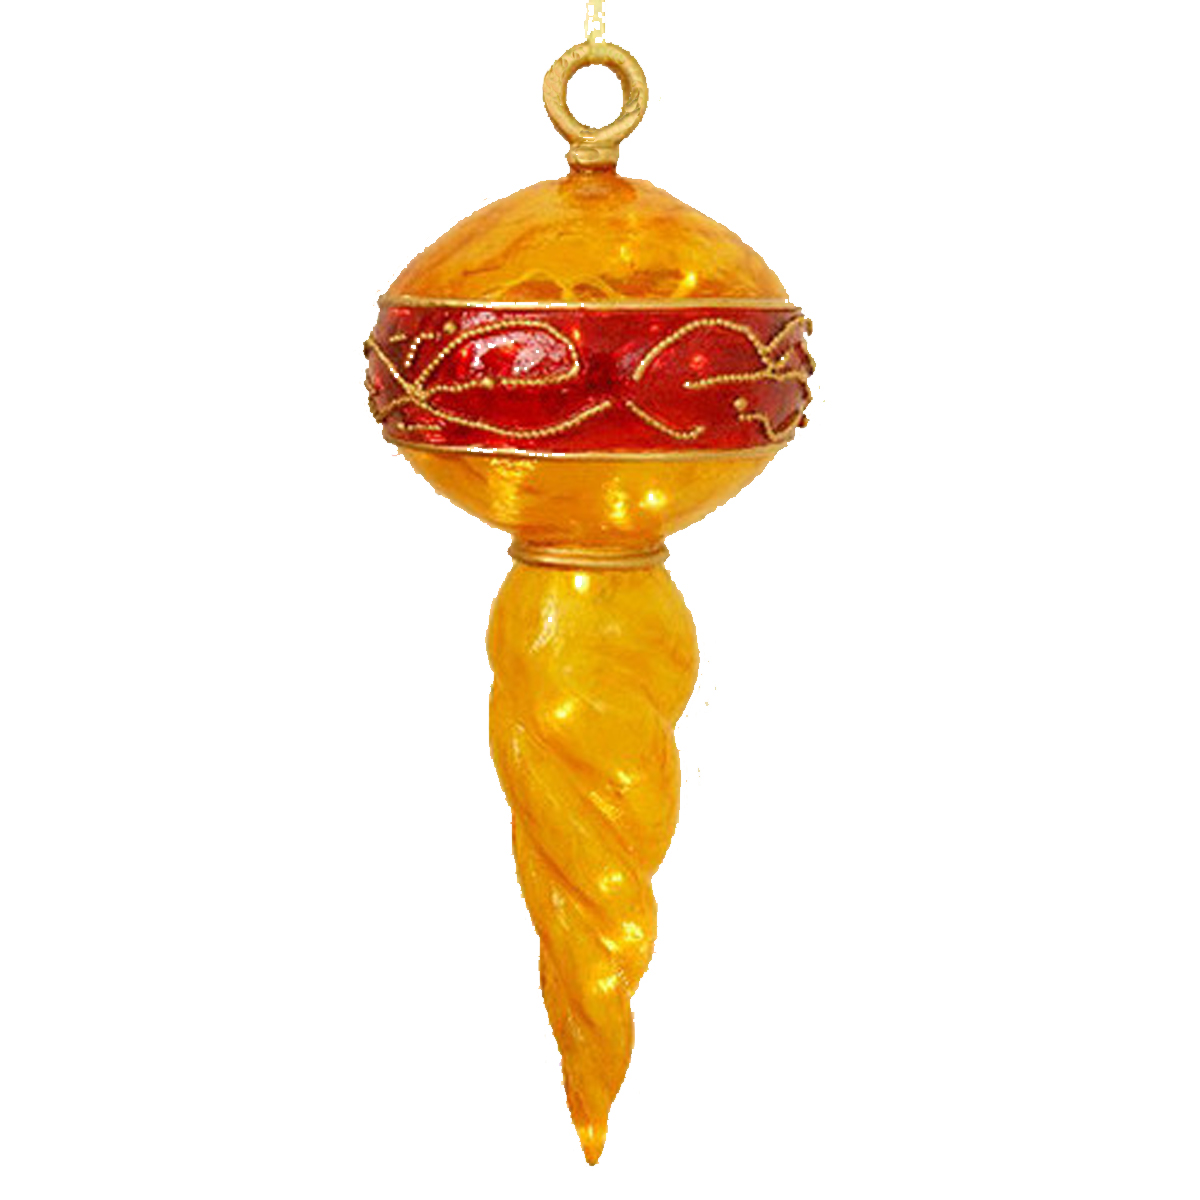 Illuminated Gold with Red Finial Ornament